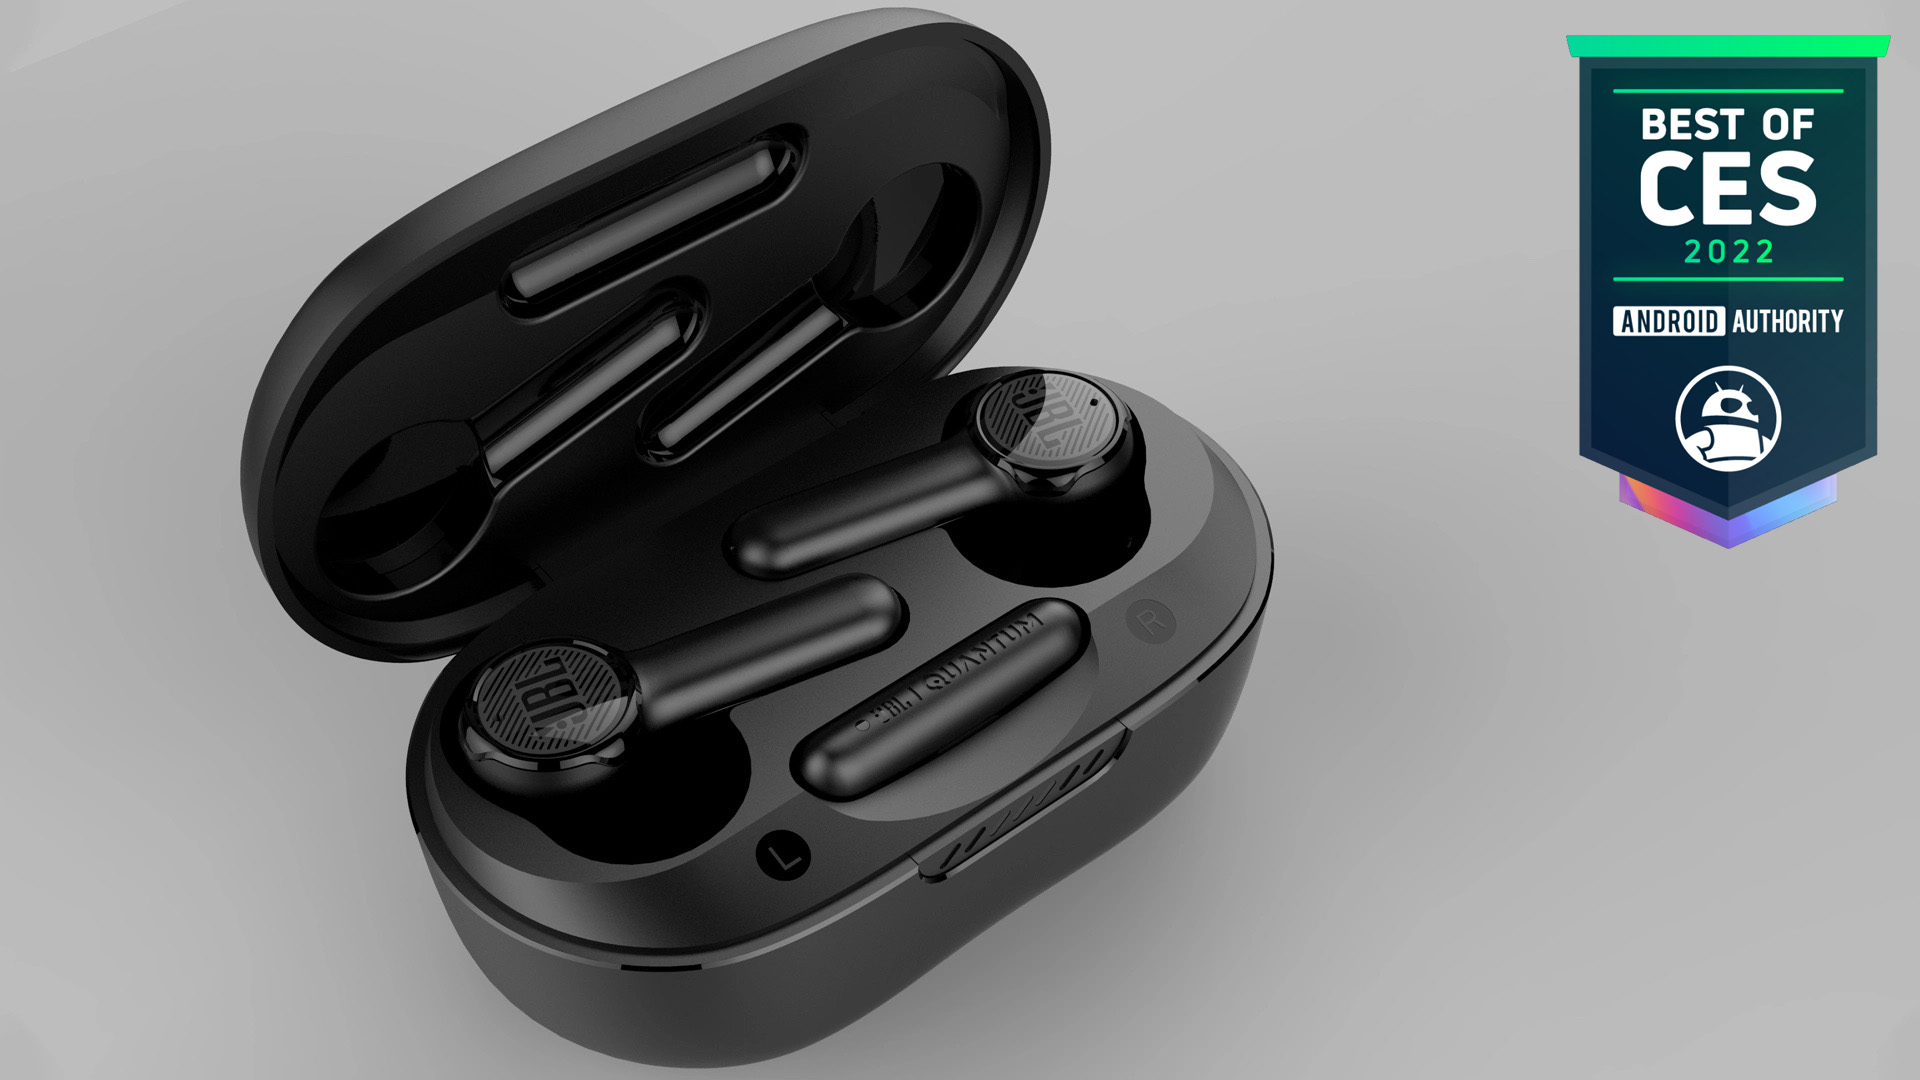 JBL Quantum TWS earbuds Android Authority Best of CES 2022 Award winner